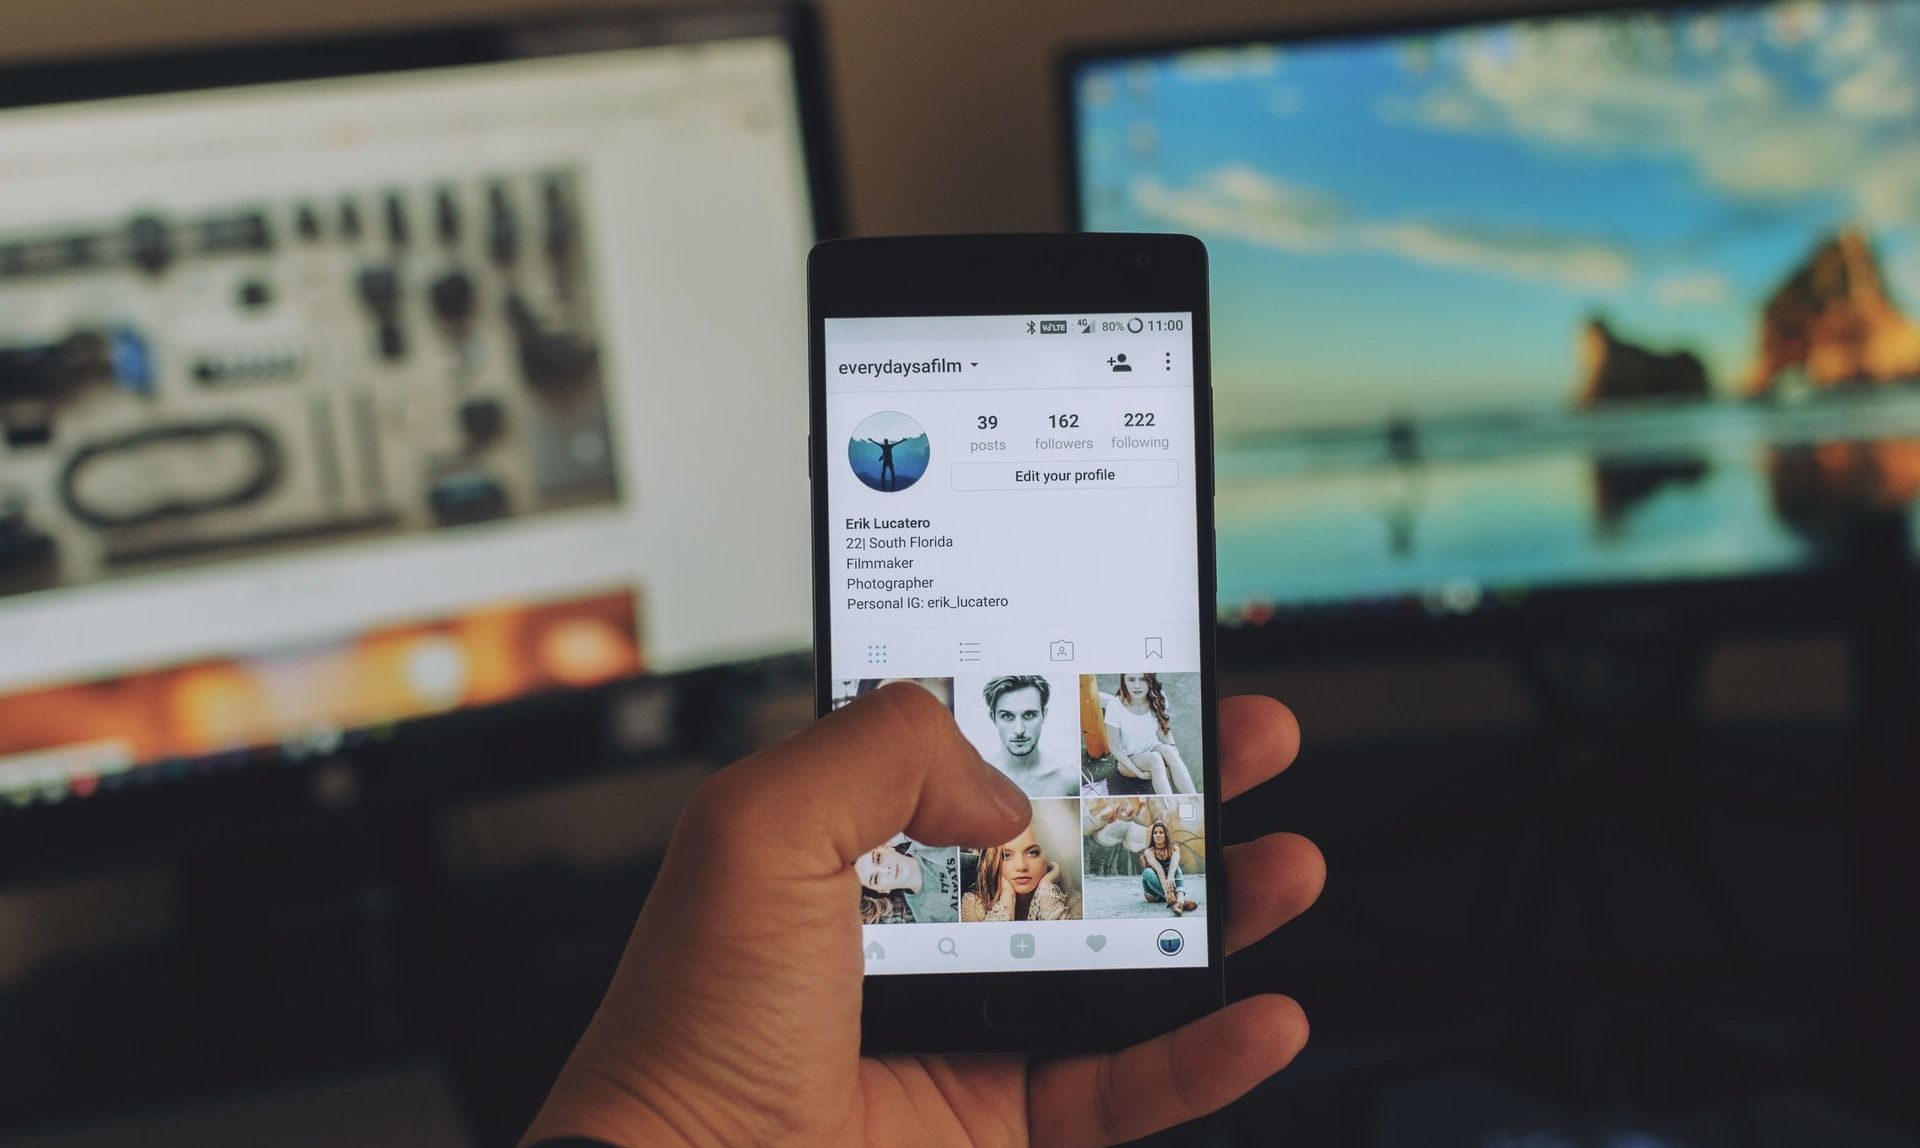 Instagram Account Profile on Mobile Phone